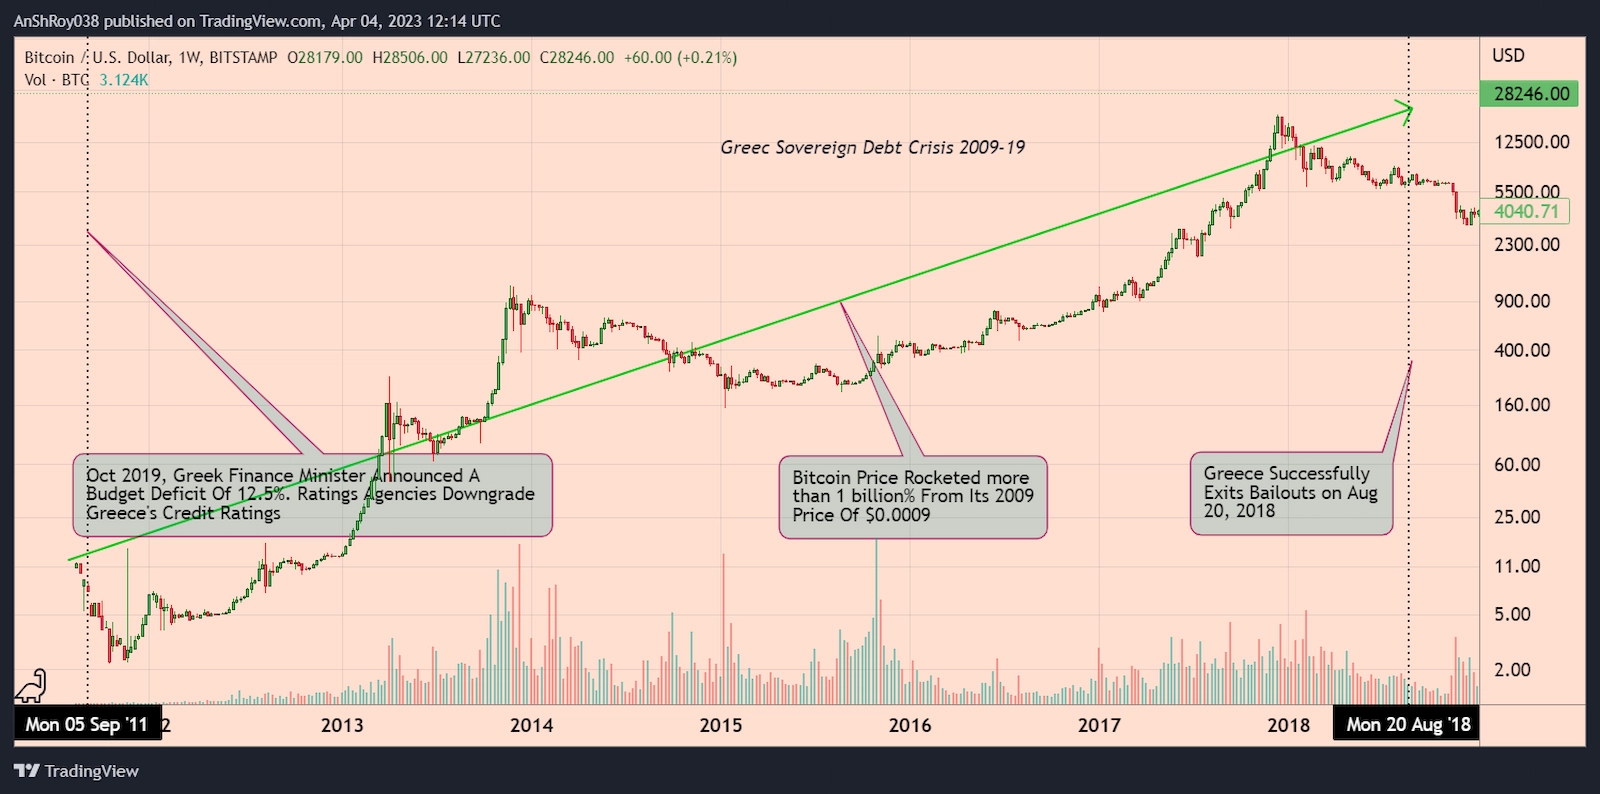 Bitcoin price action since 2011.